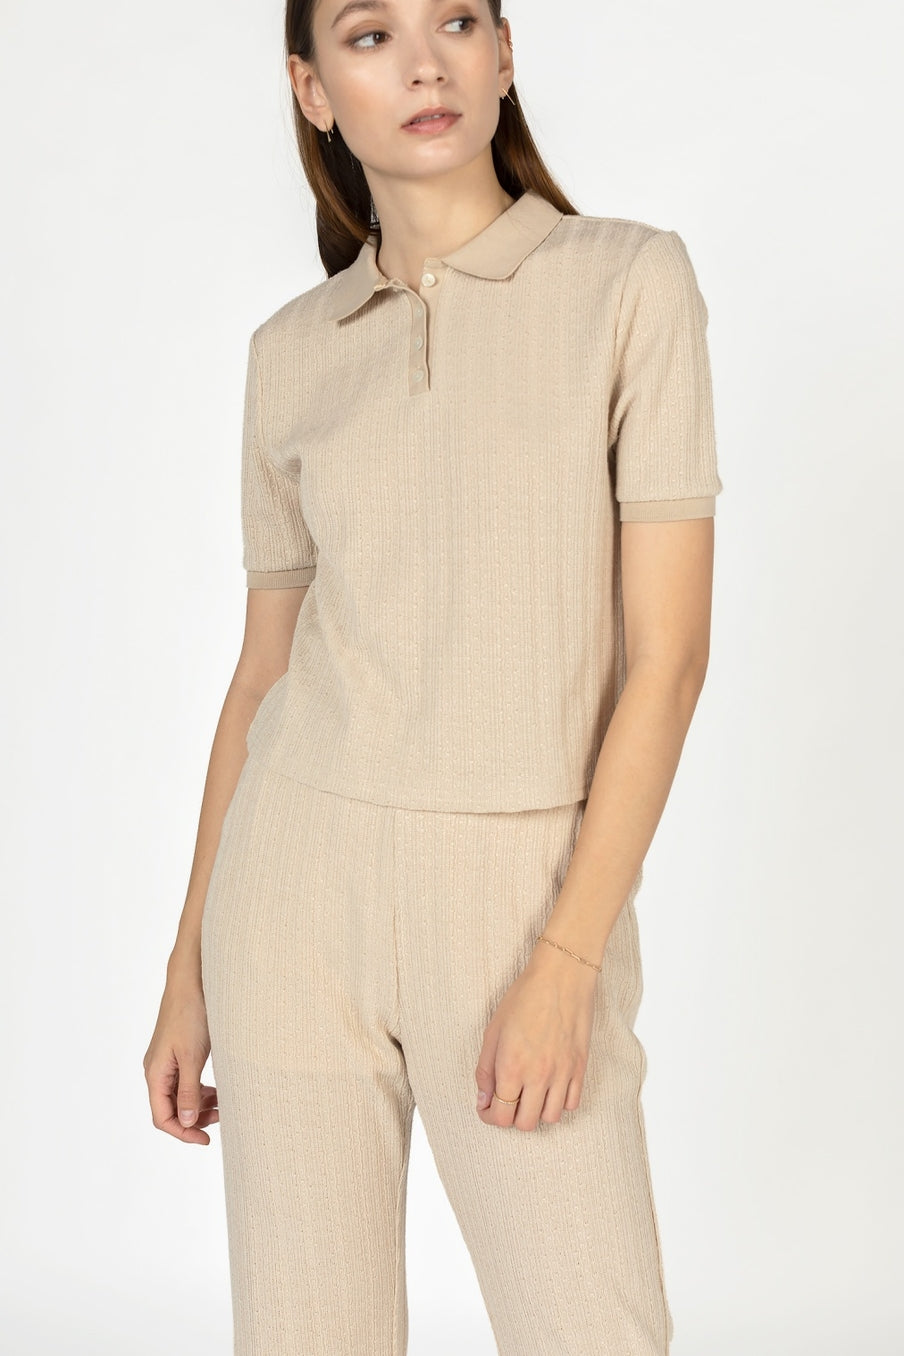 This light-weight knit polo top by Mod Ref features a partial button-front placket  in taupe at Tru Blue Boutique